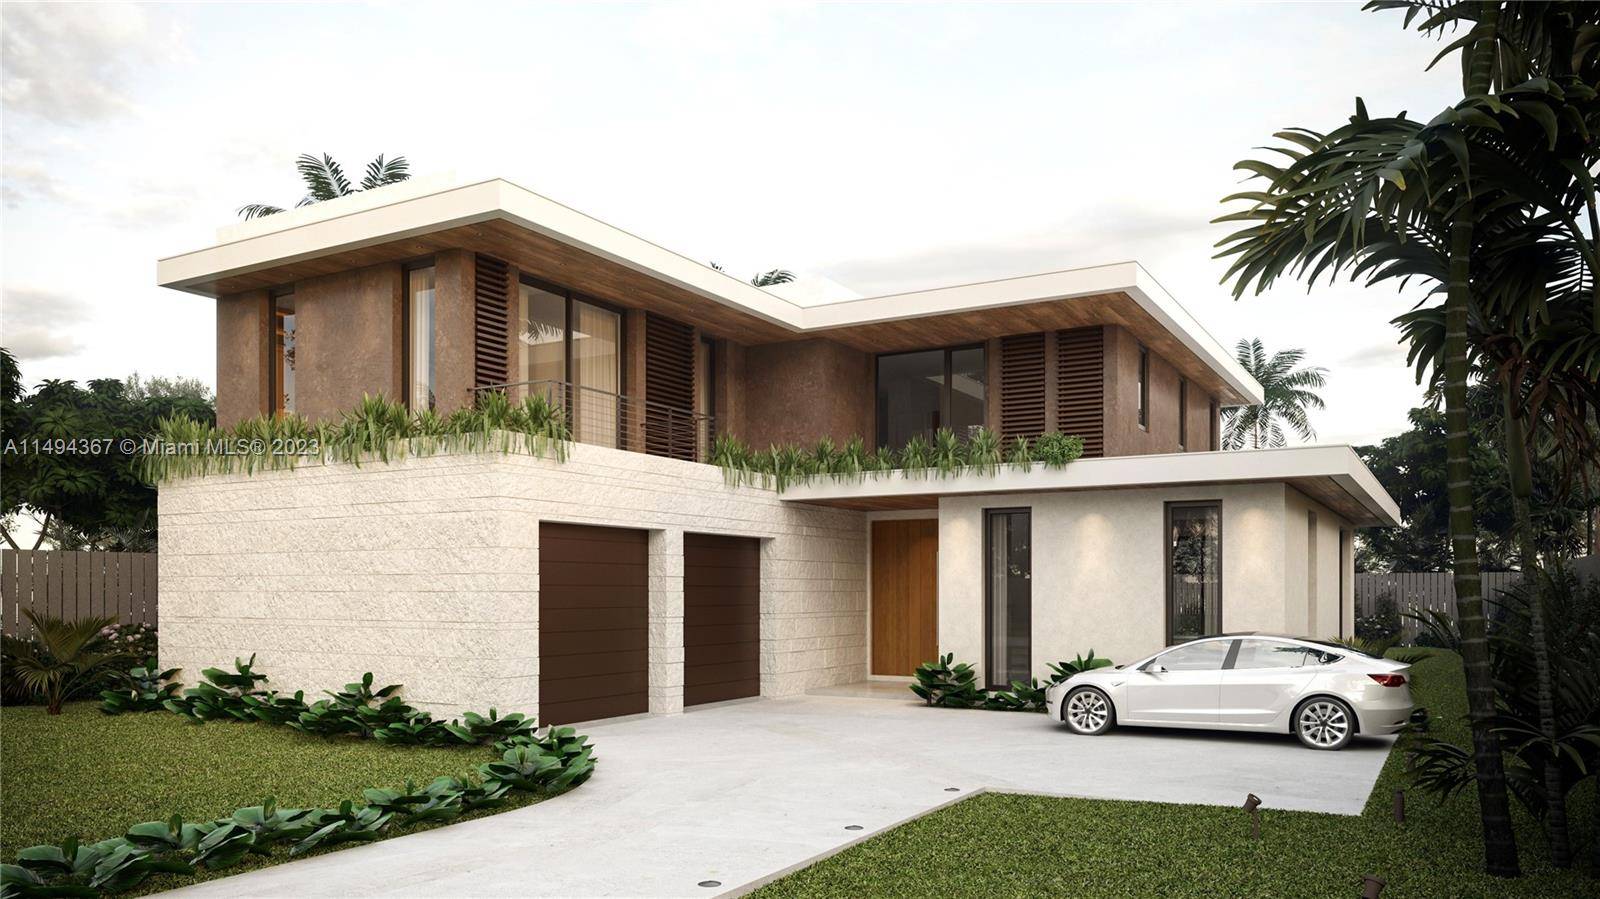 Rare opportunity to own New Designer residence in highly sought after South Coconut Grove.